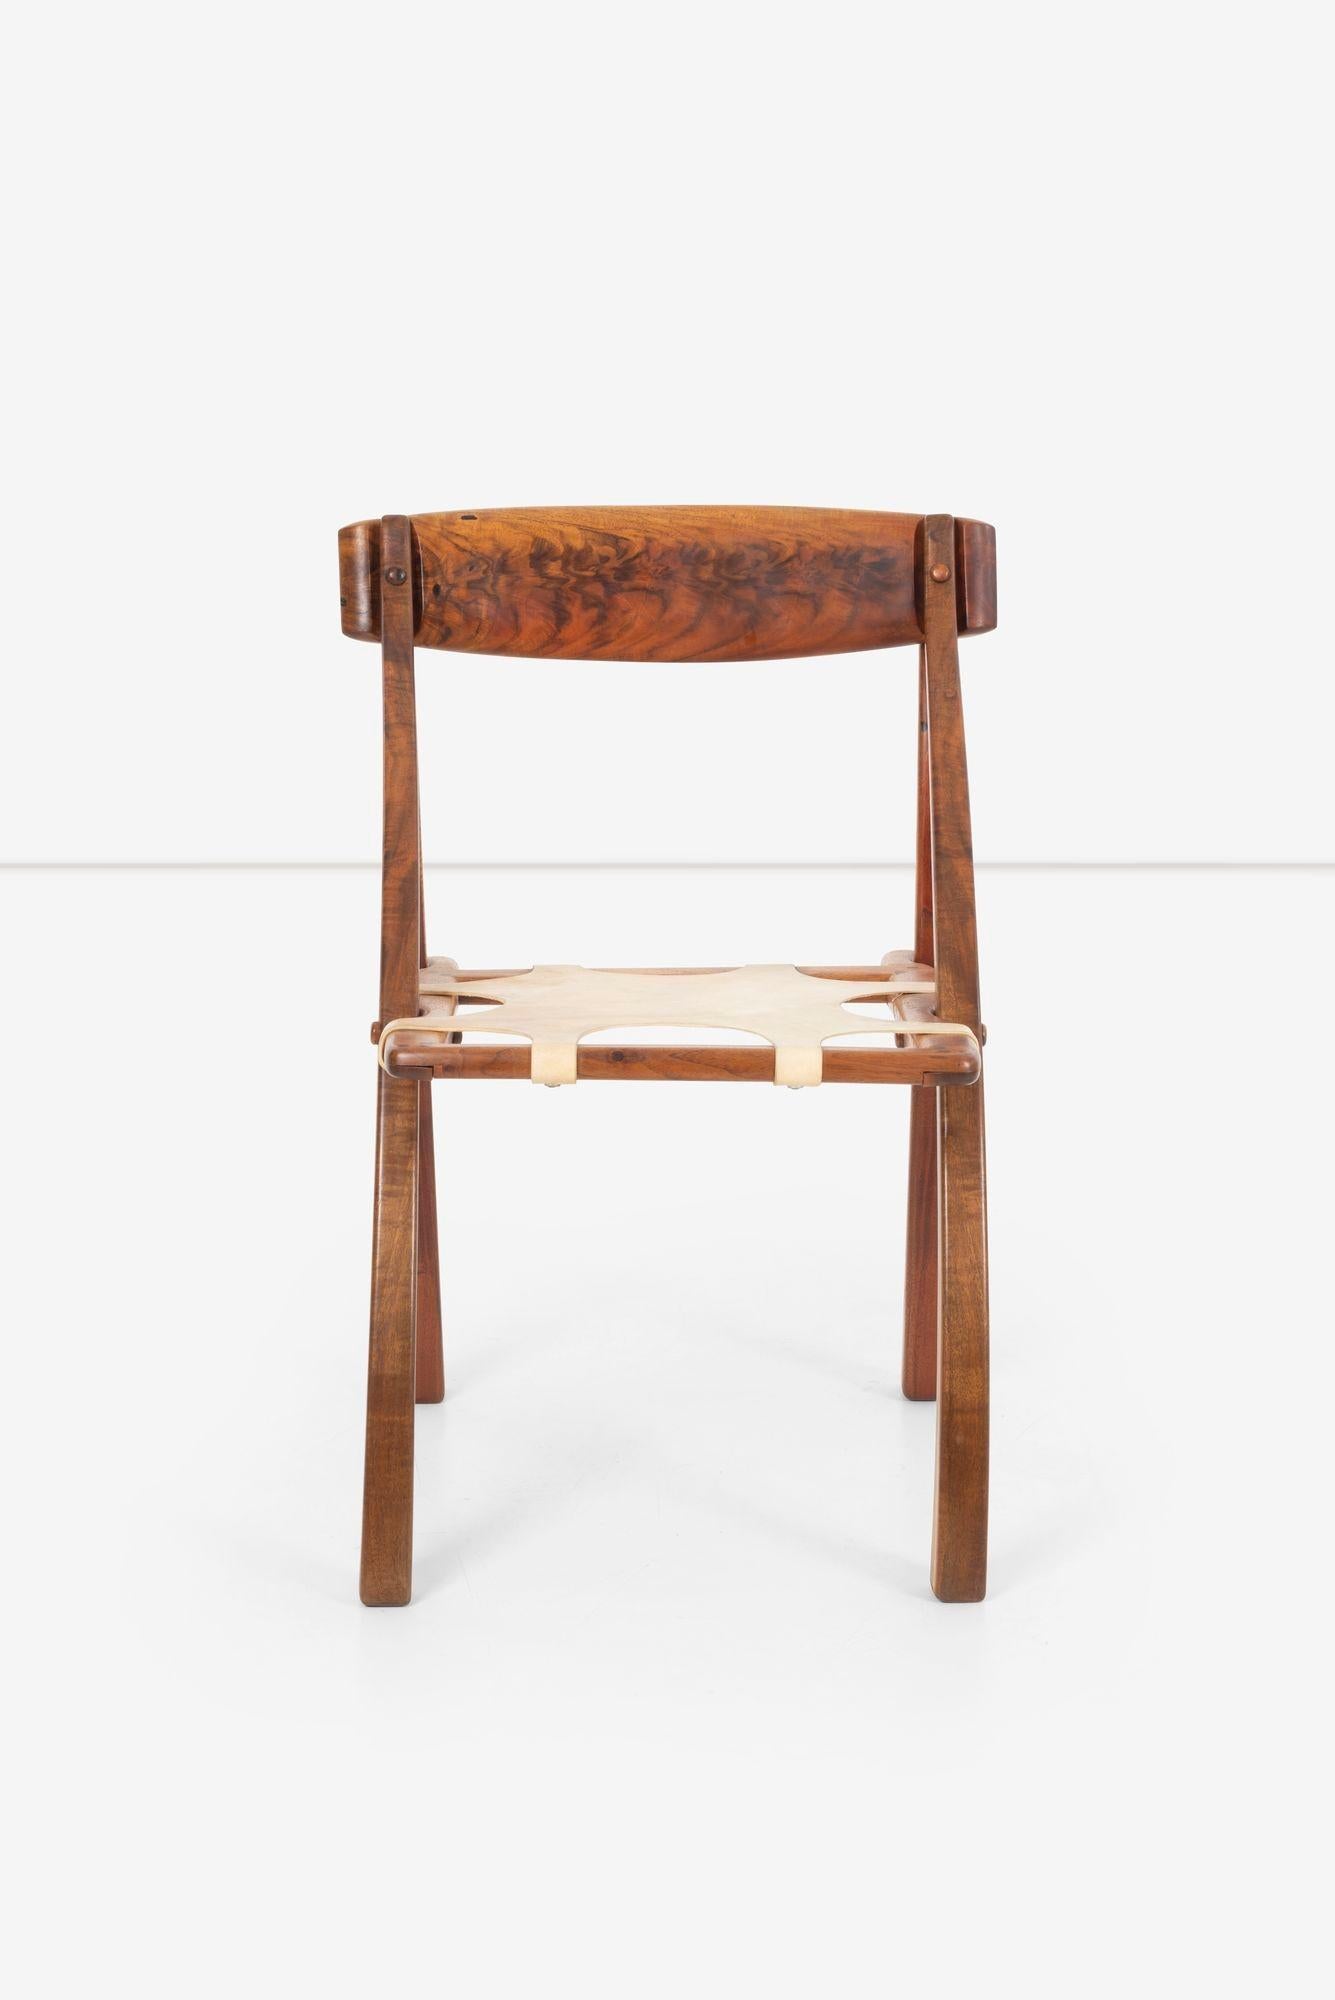 Arthur Espenet Carpenter Wishbone Chair, Walnut Frame with vellum sling seat.
Carved signature and number to the underside of the chair ‘Espenet 8010 3 Re 85 Ellis’.
Seat height17.5